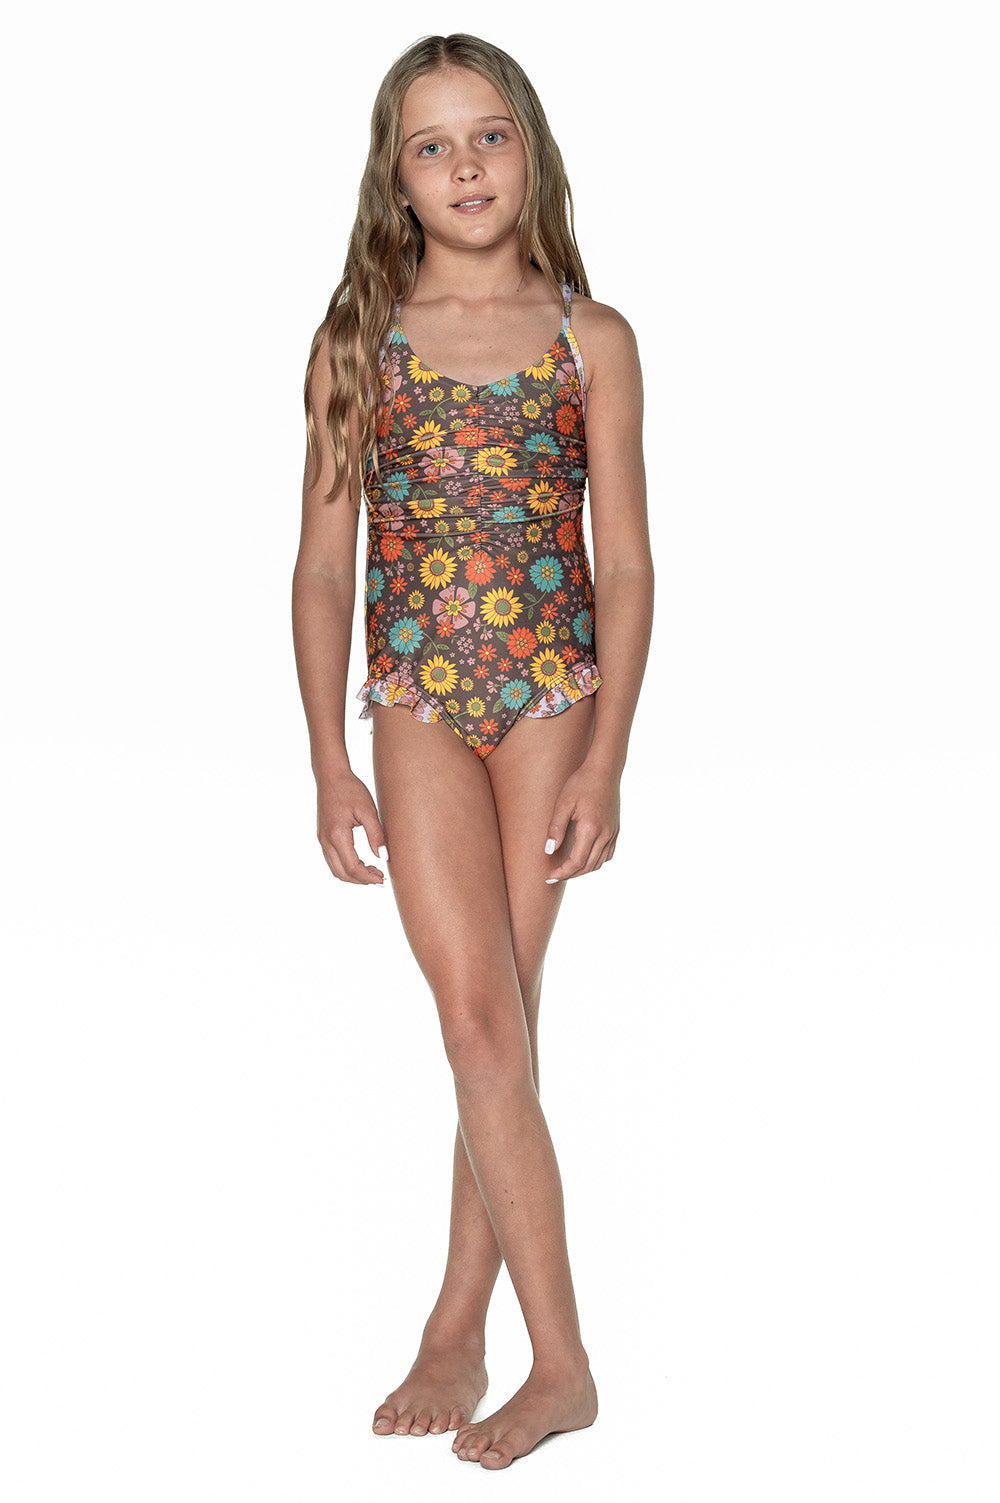 Peace, Love & Happiness One Piece Cross Back with Tie (Poppy)